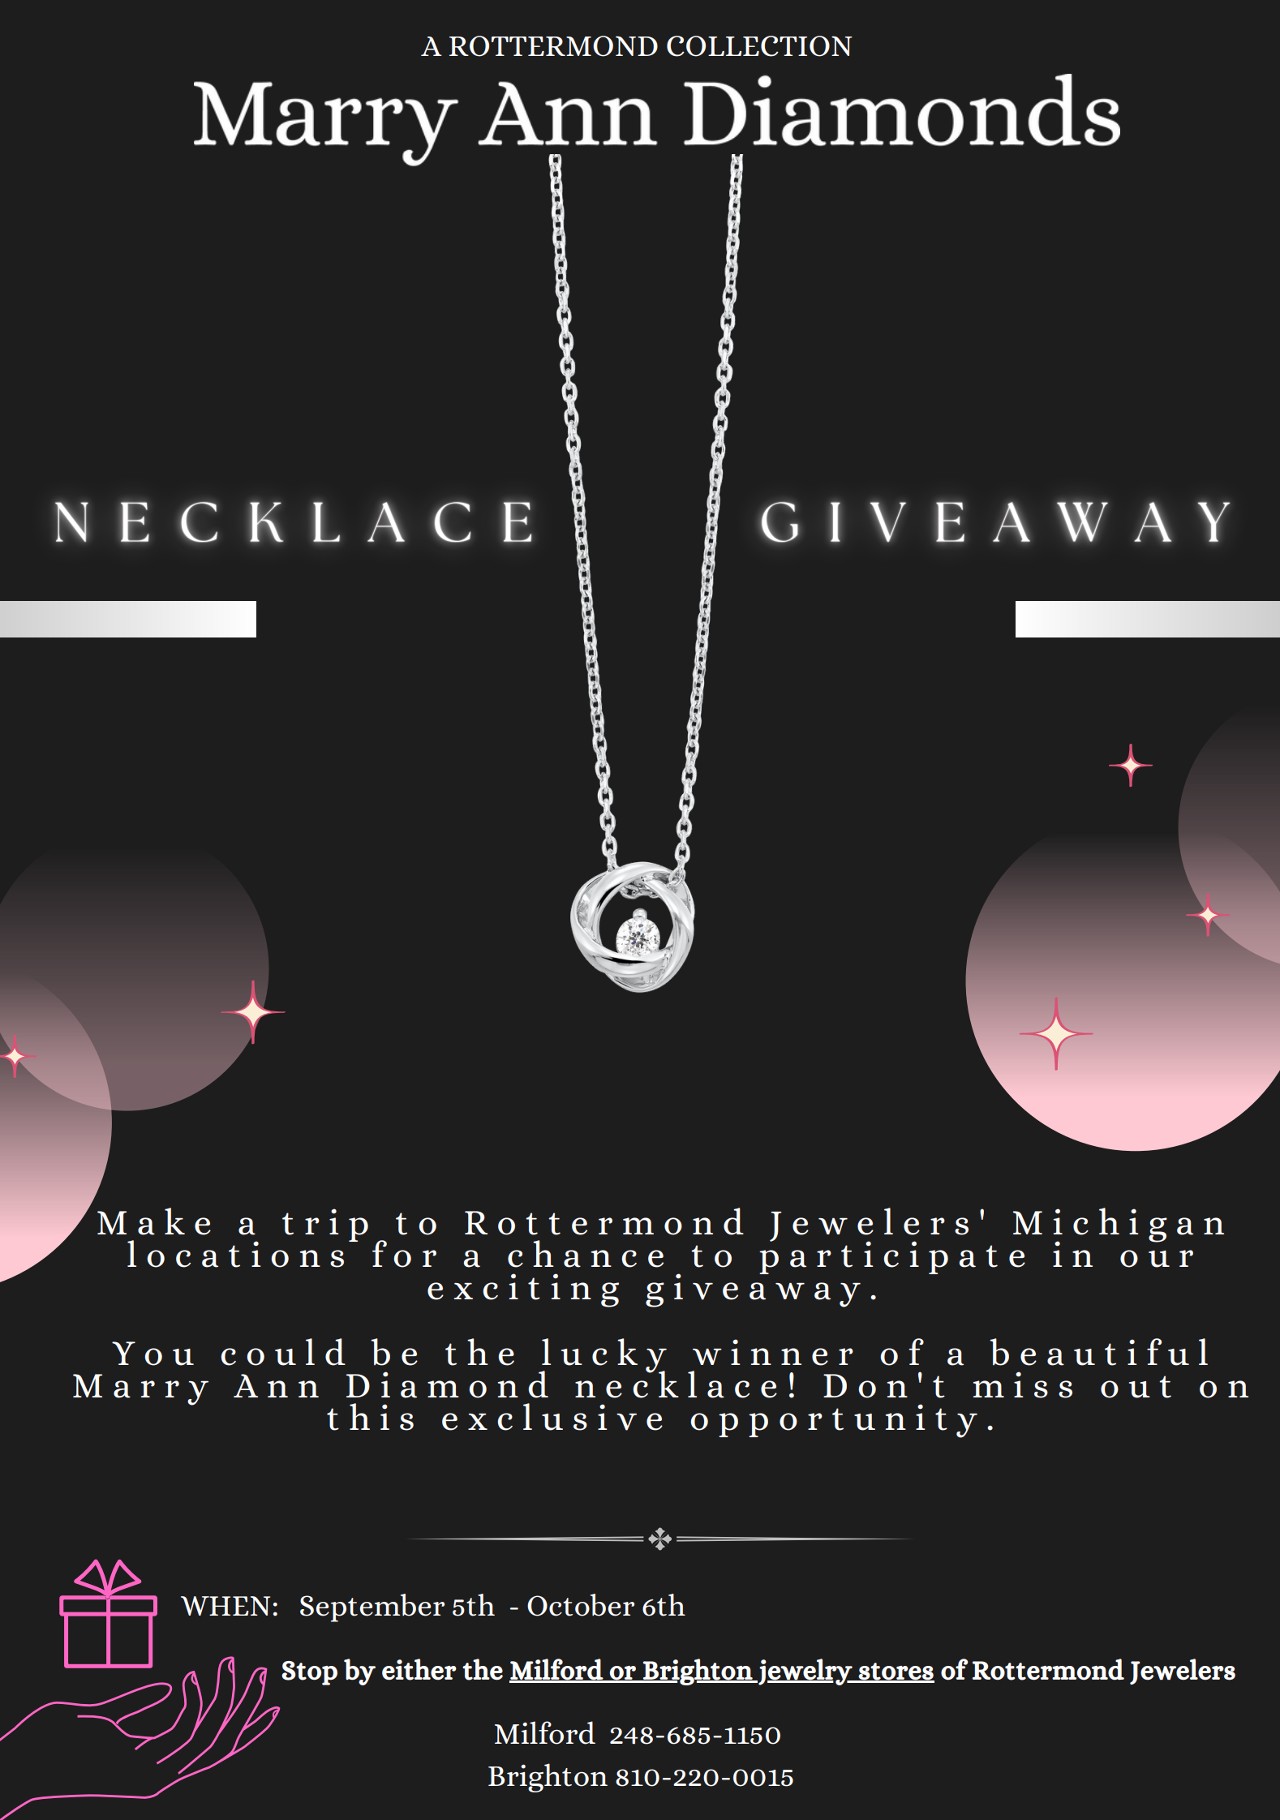 September 5th - October 6th, enter Rottermond's Marry Ann Diamond Necklace Giveaway